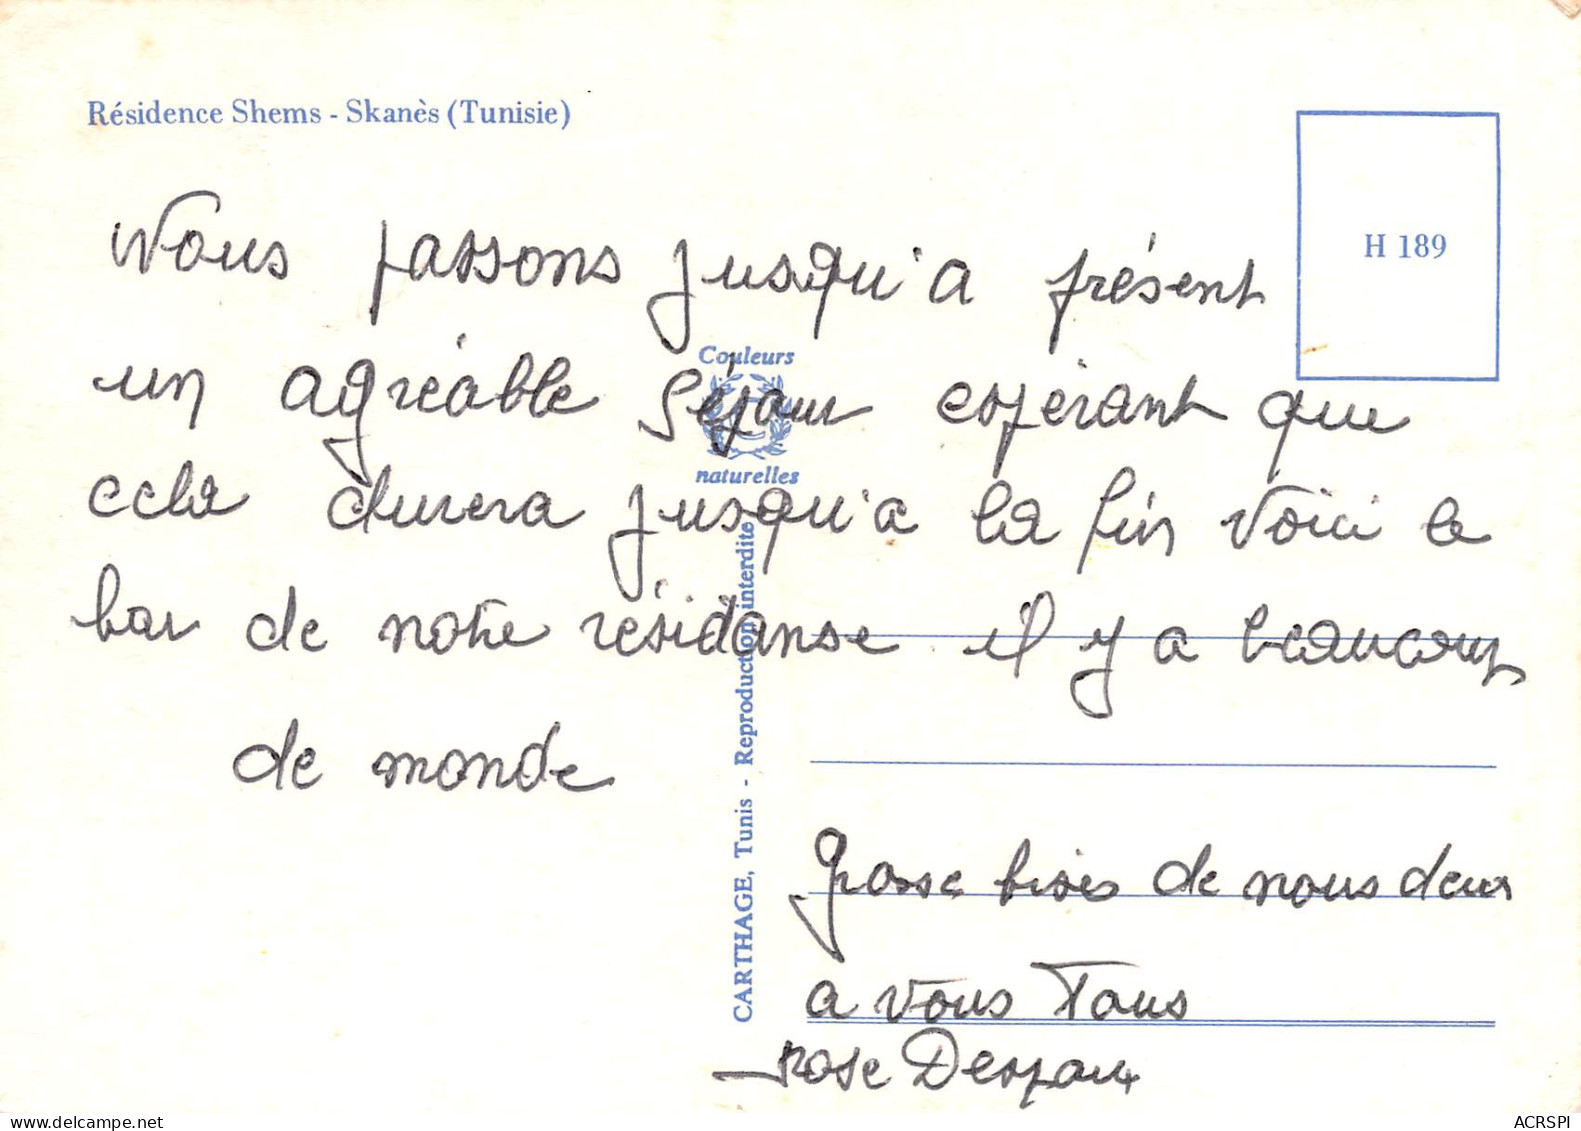 TUNISIE  SKANES Résidence Shems   10 (scan Recto Verso)MF2769VIC - Tunisie